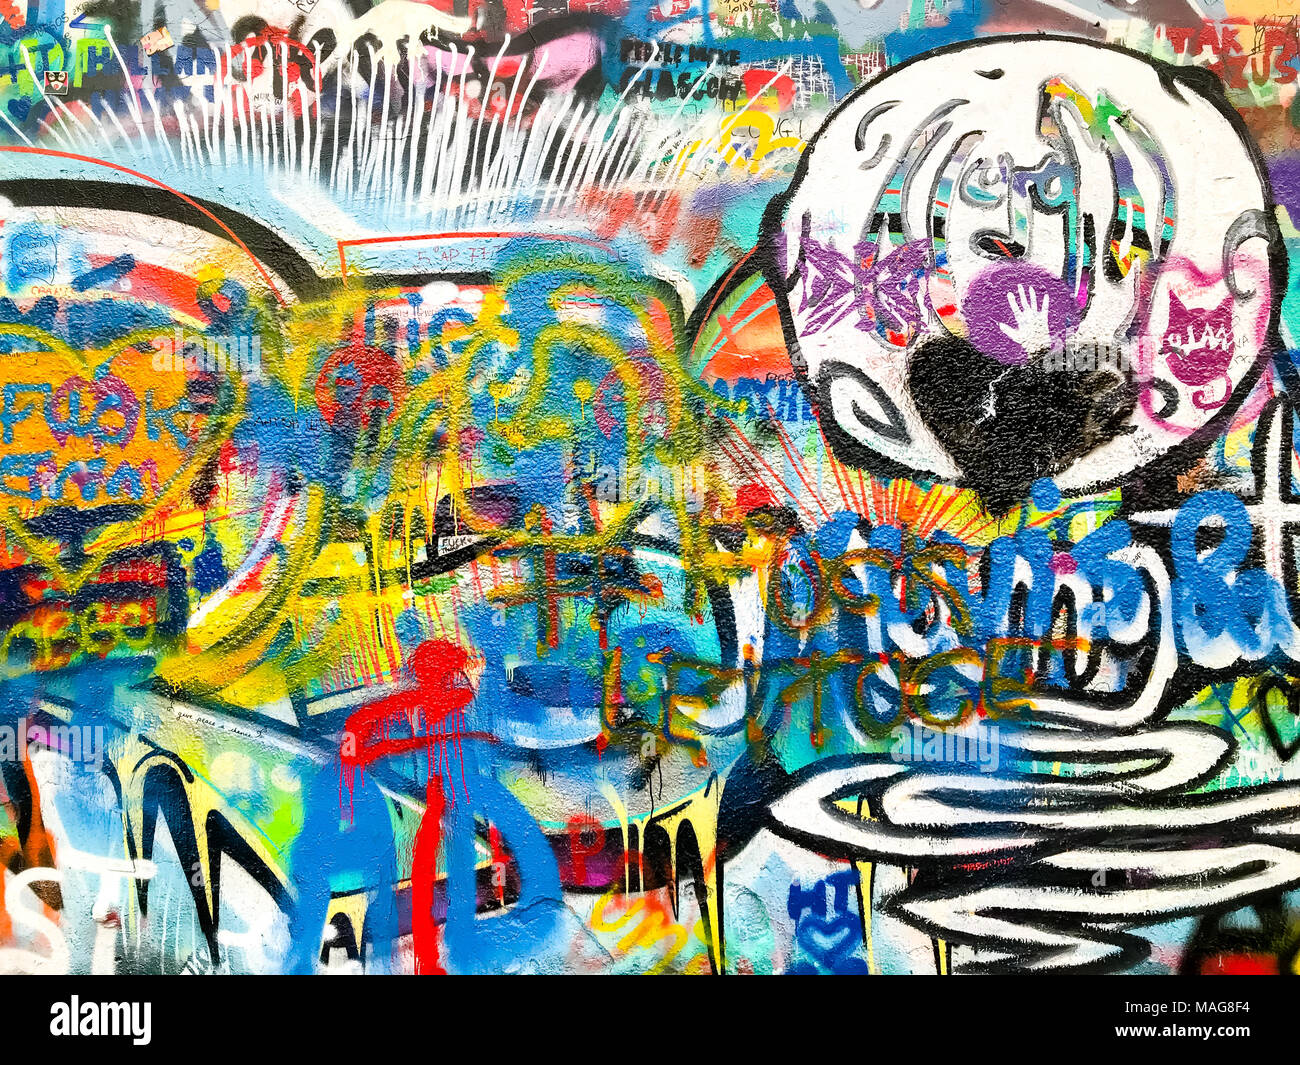 John Lennon tribute wall in Prague city center, covered with colorful graffiti and paintings by common people Stock Photo